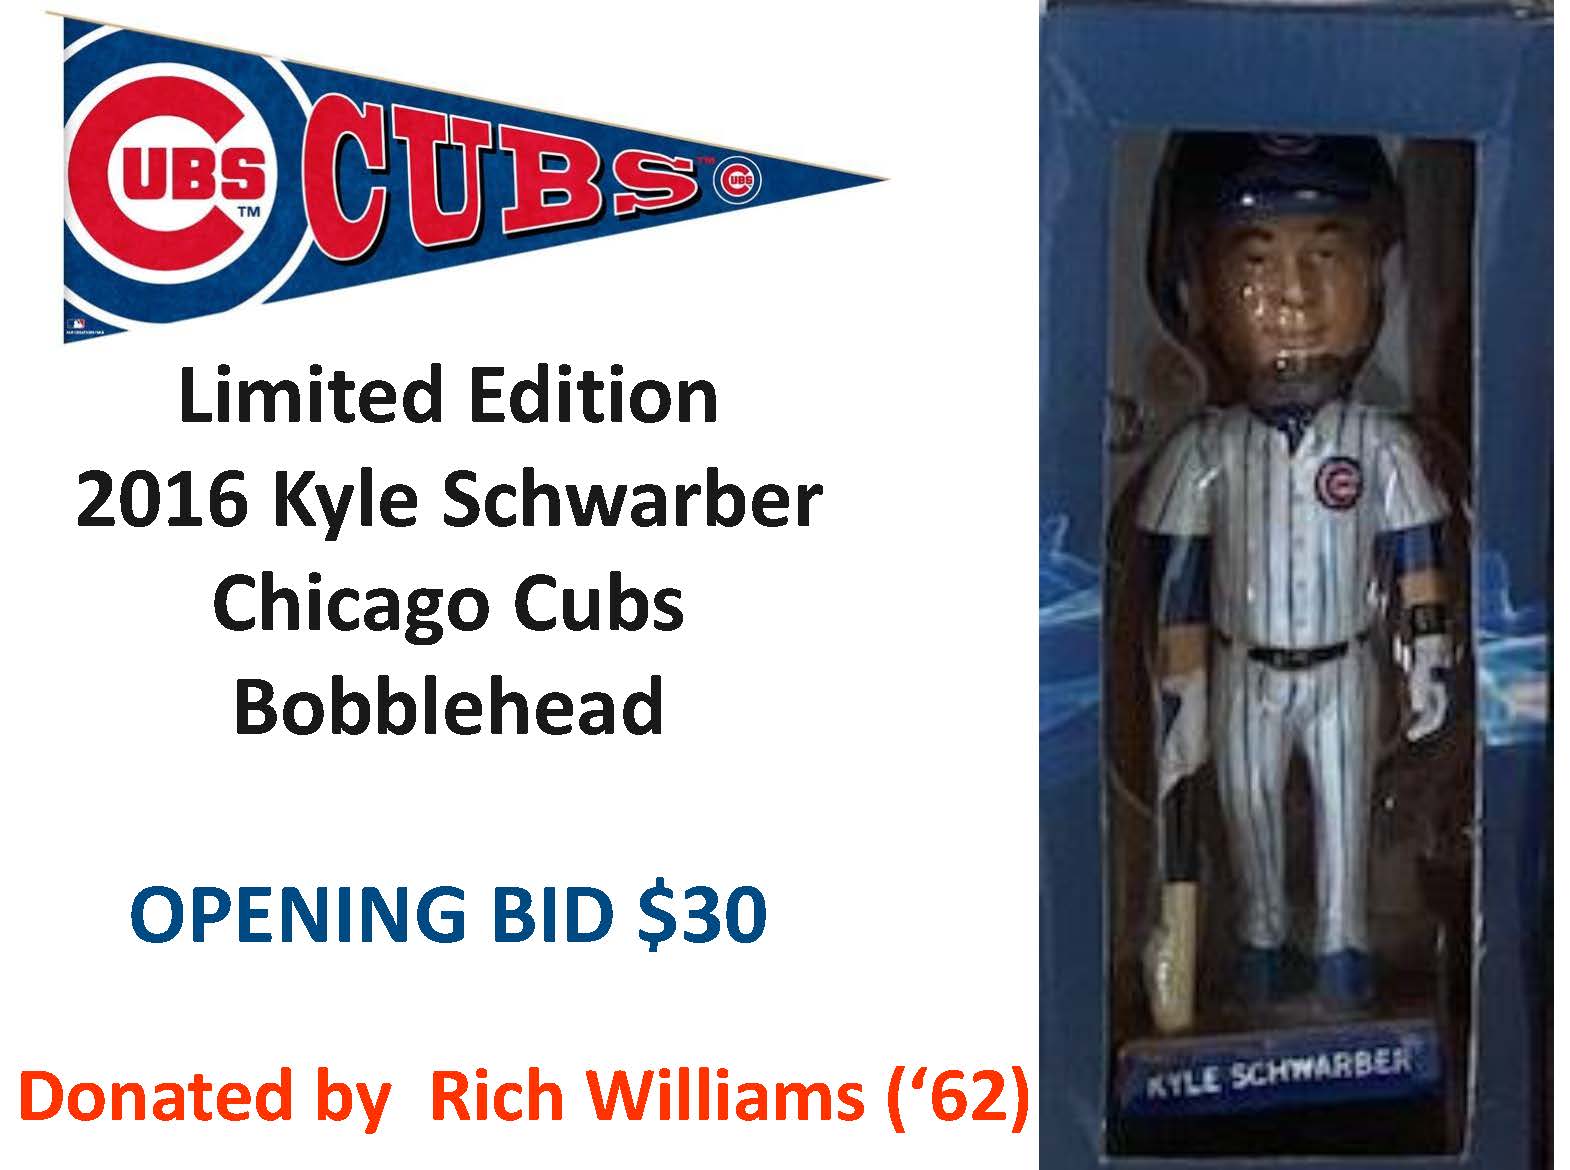 Featured image for “2016 Kyle Schwarber Chicago Cubs Limited Edition Bobblehead”